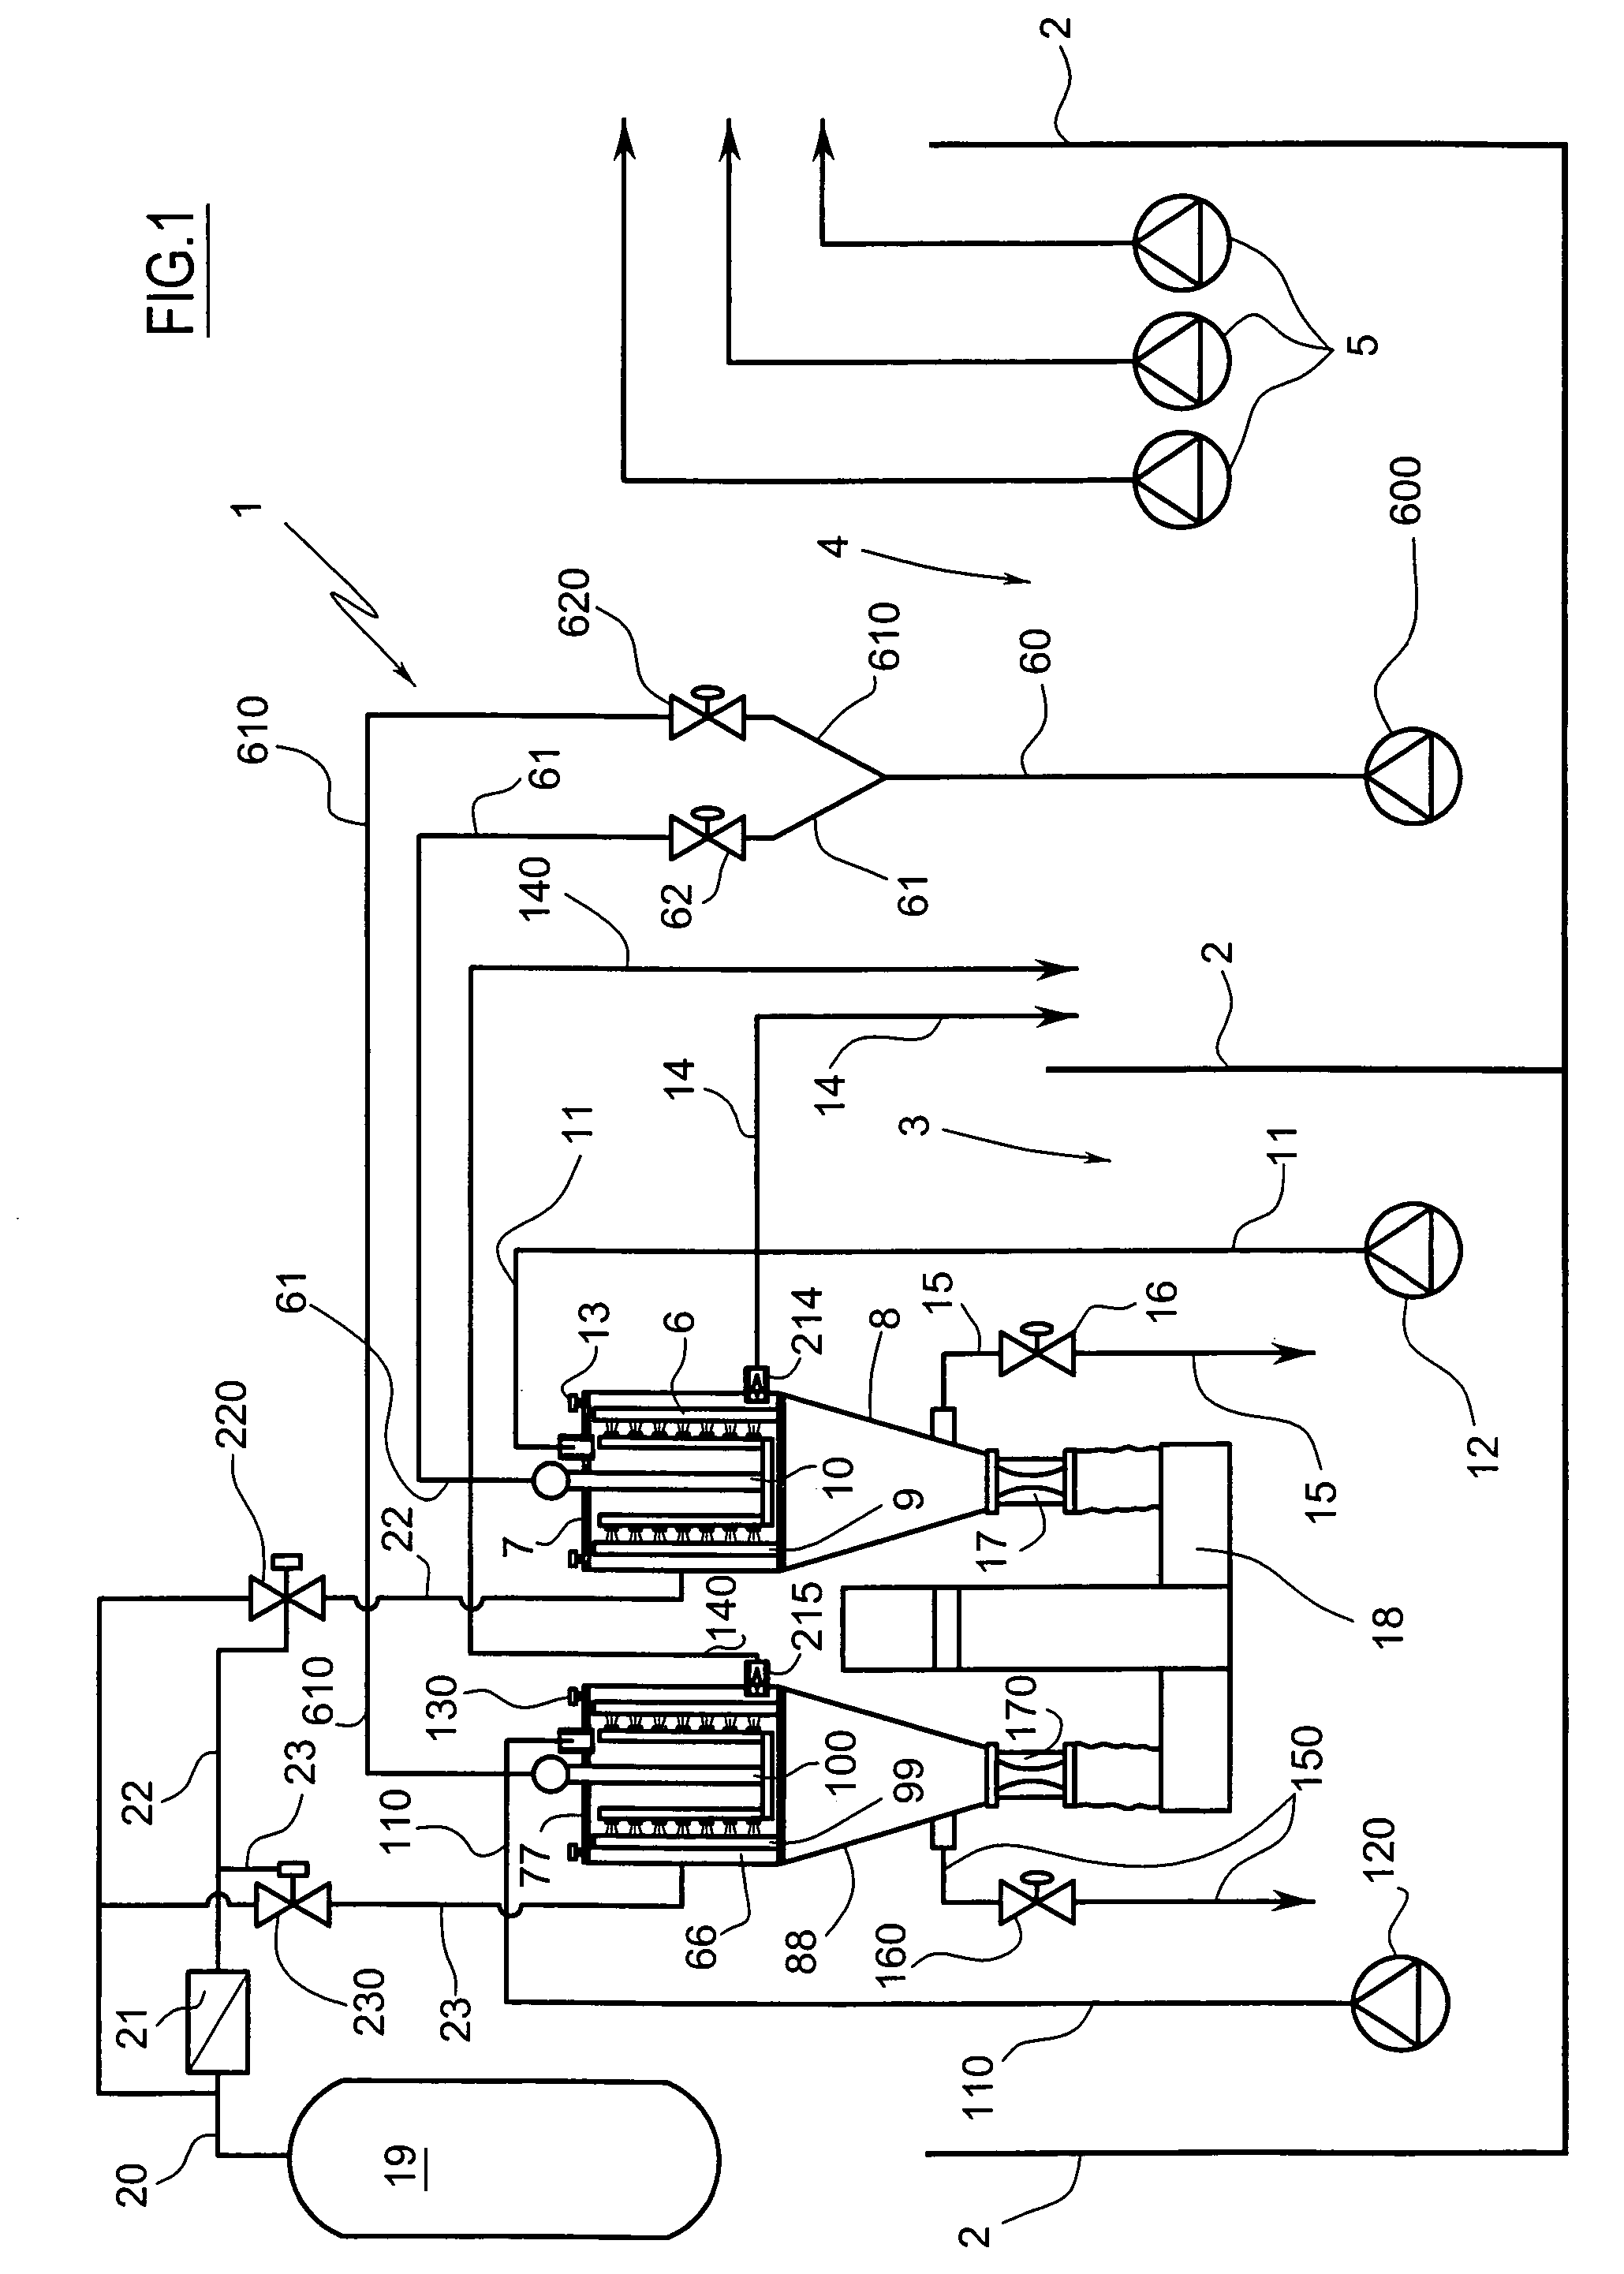 Plant and method for the treatment of the recovery cooling fluid in mechanical processing plants